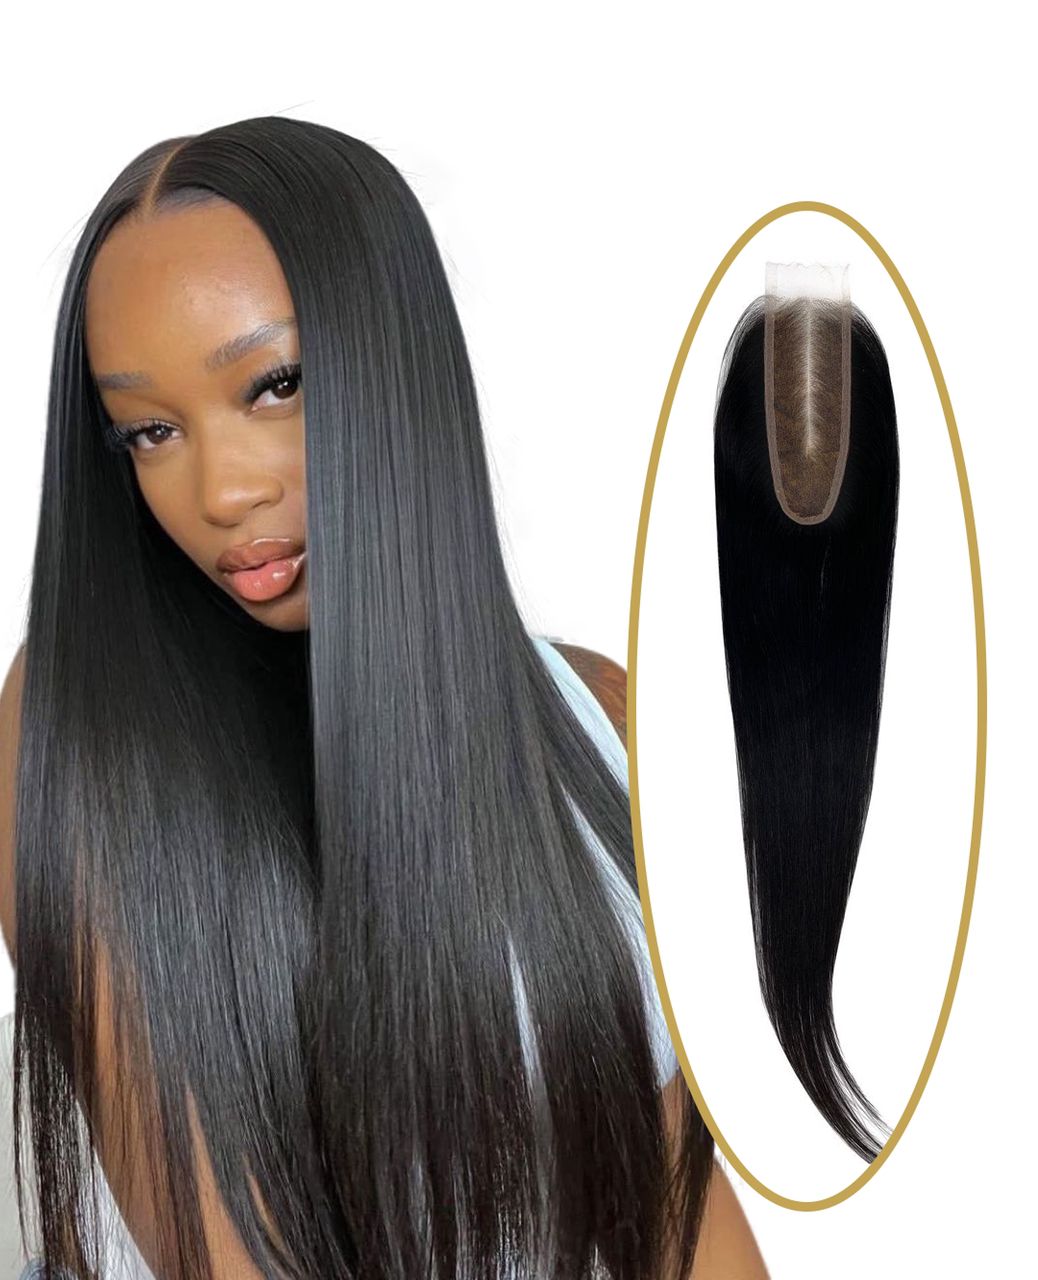 7 Closure Sew In Styles You'll Love